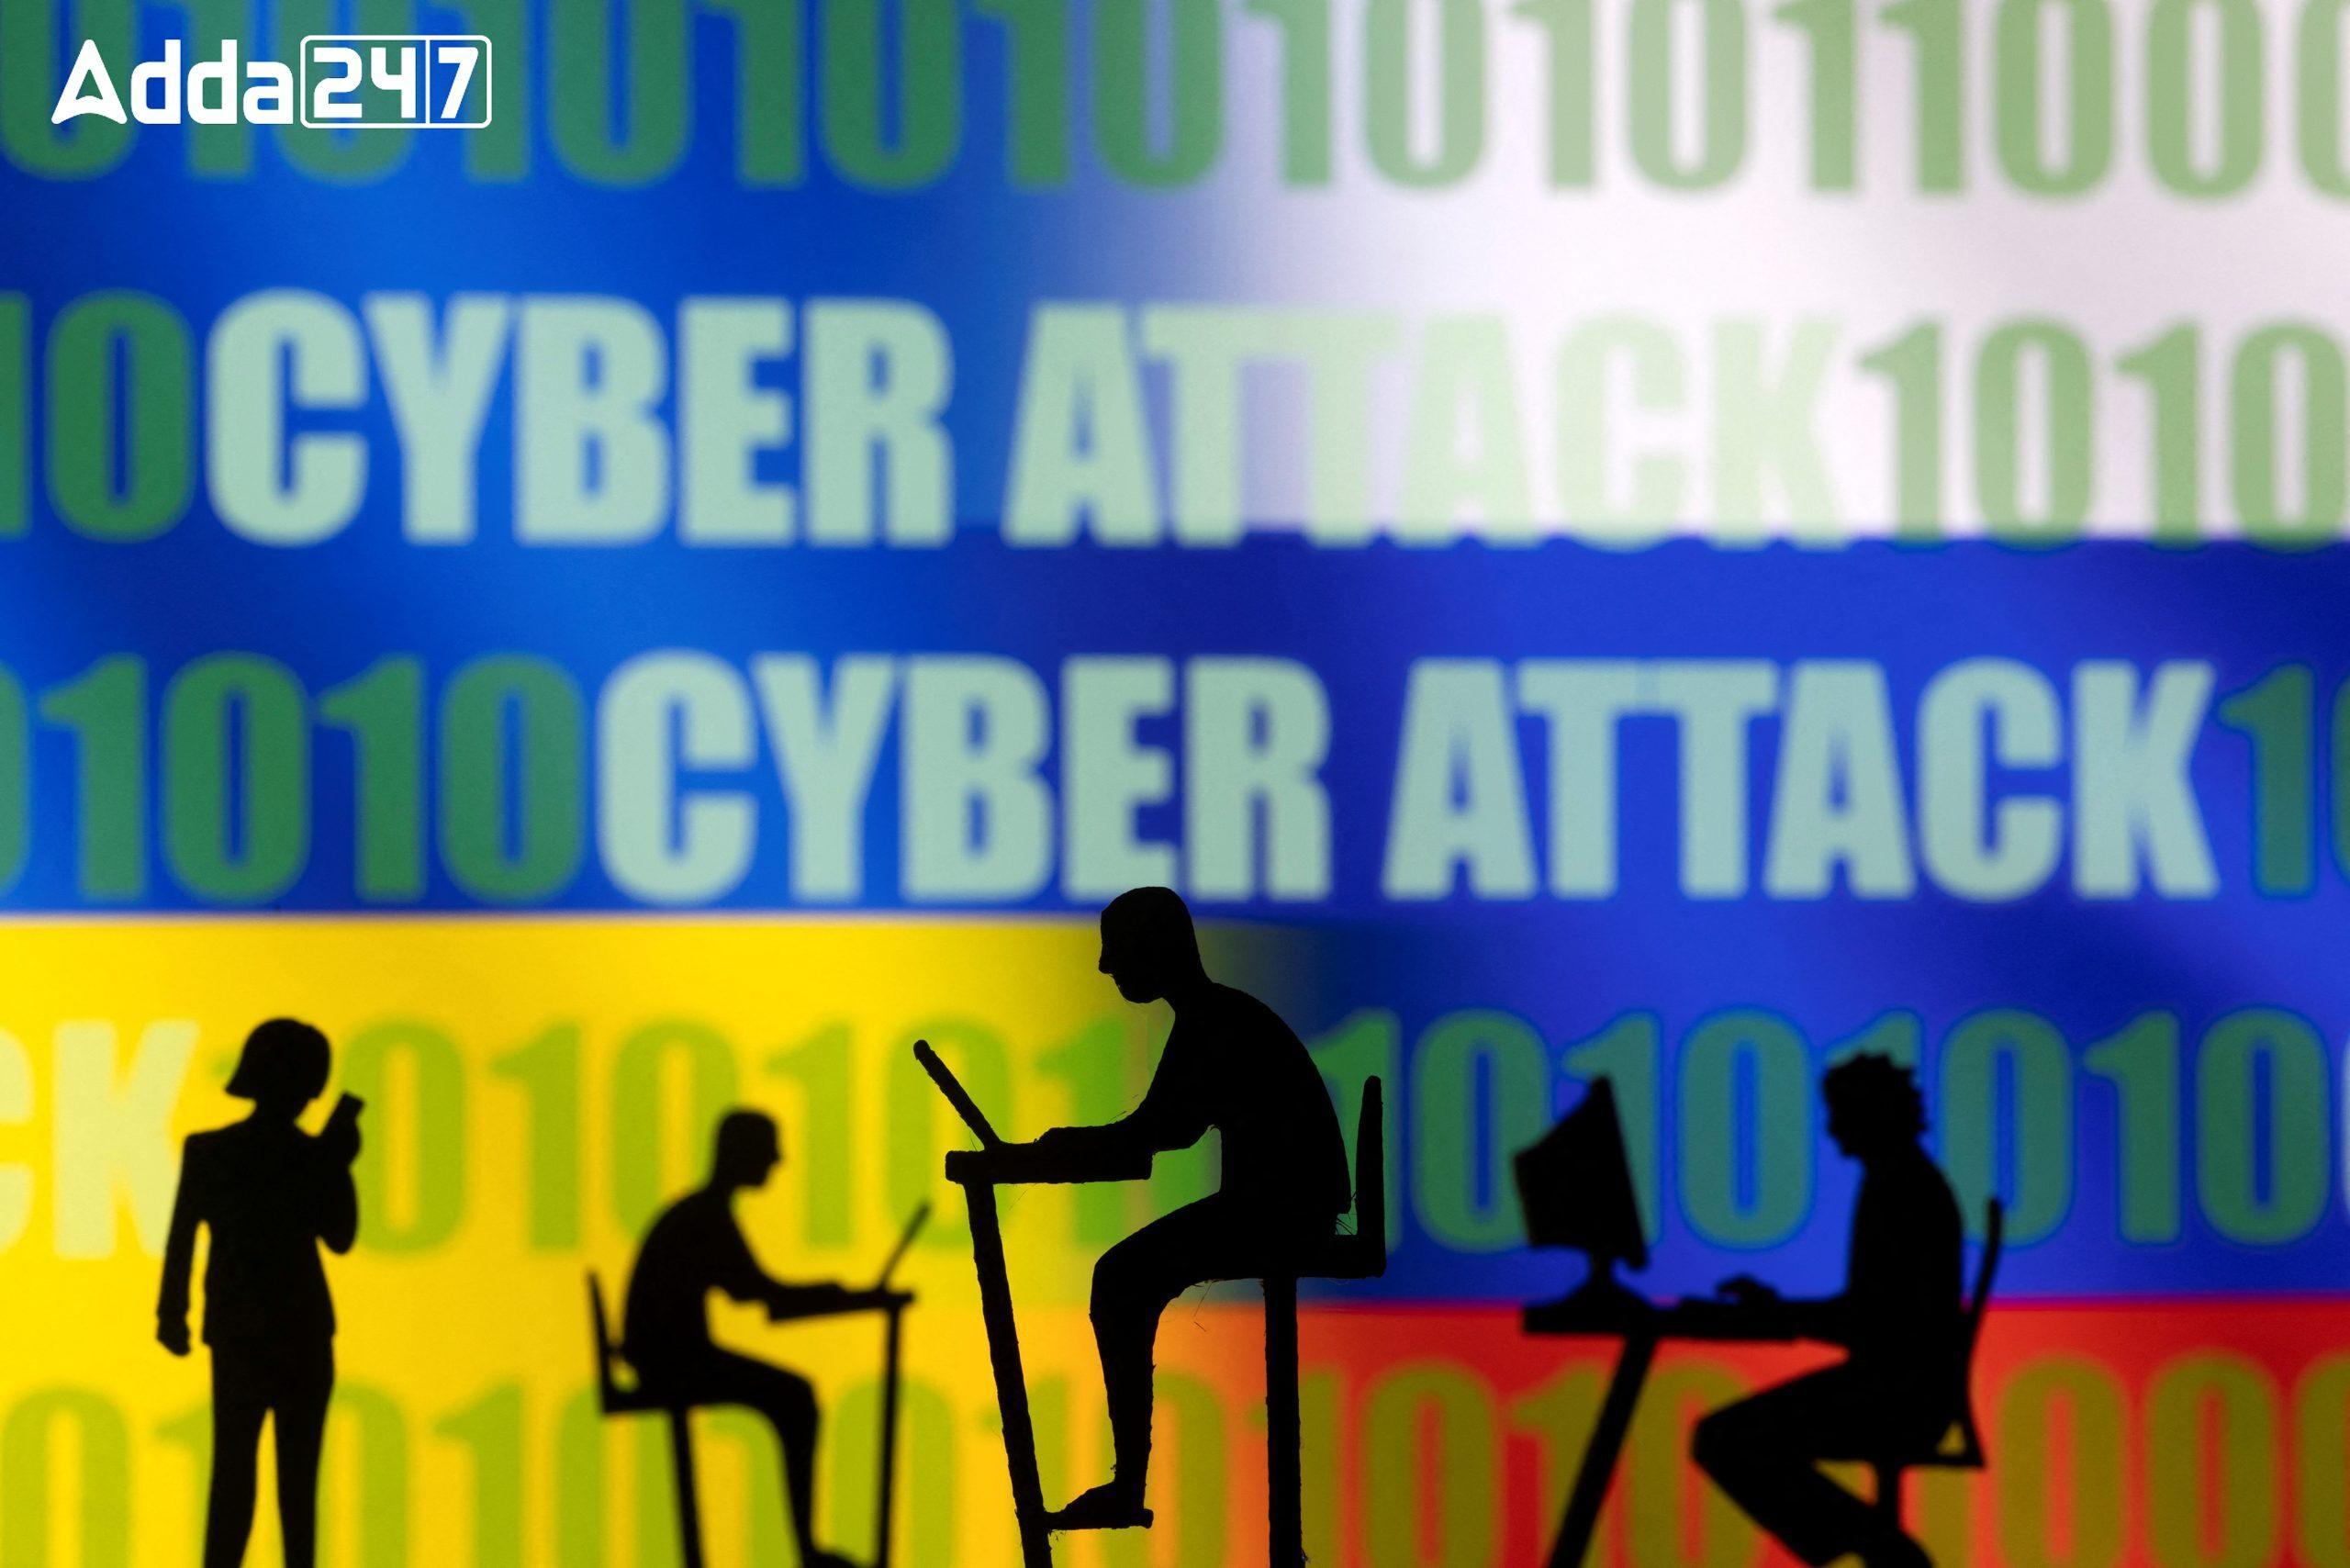 World Cybercrime Index Unveiled: Russia and Ukraine Top List